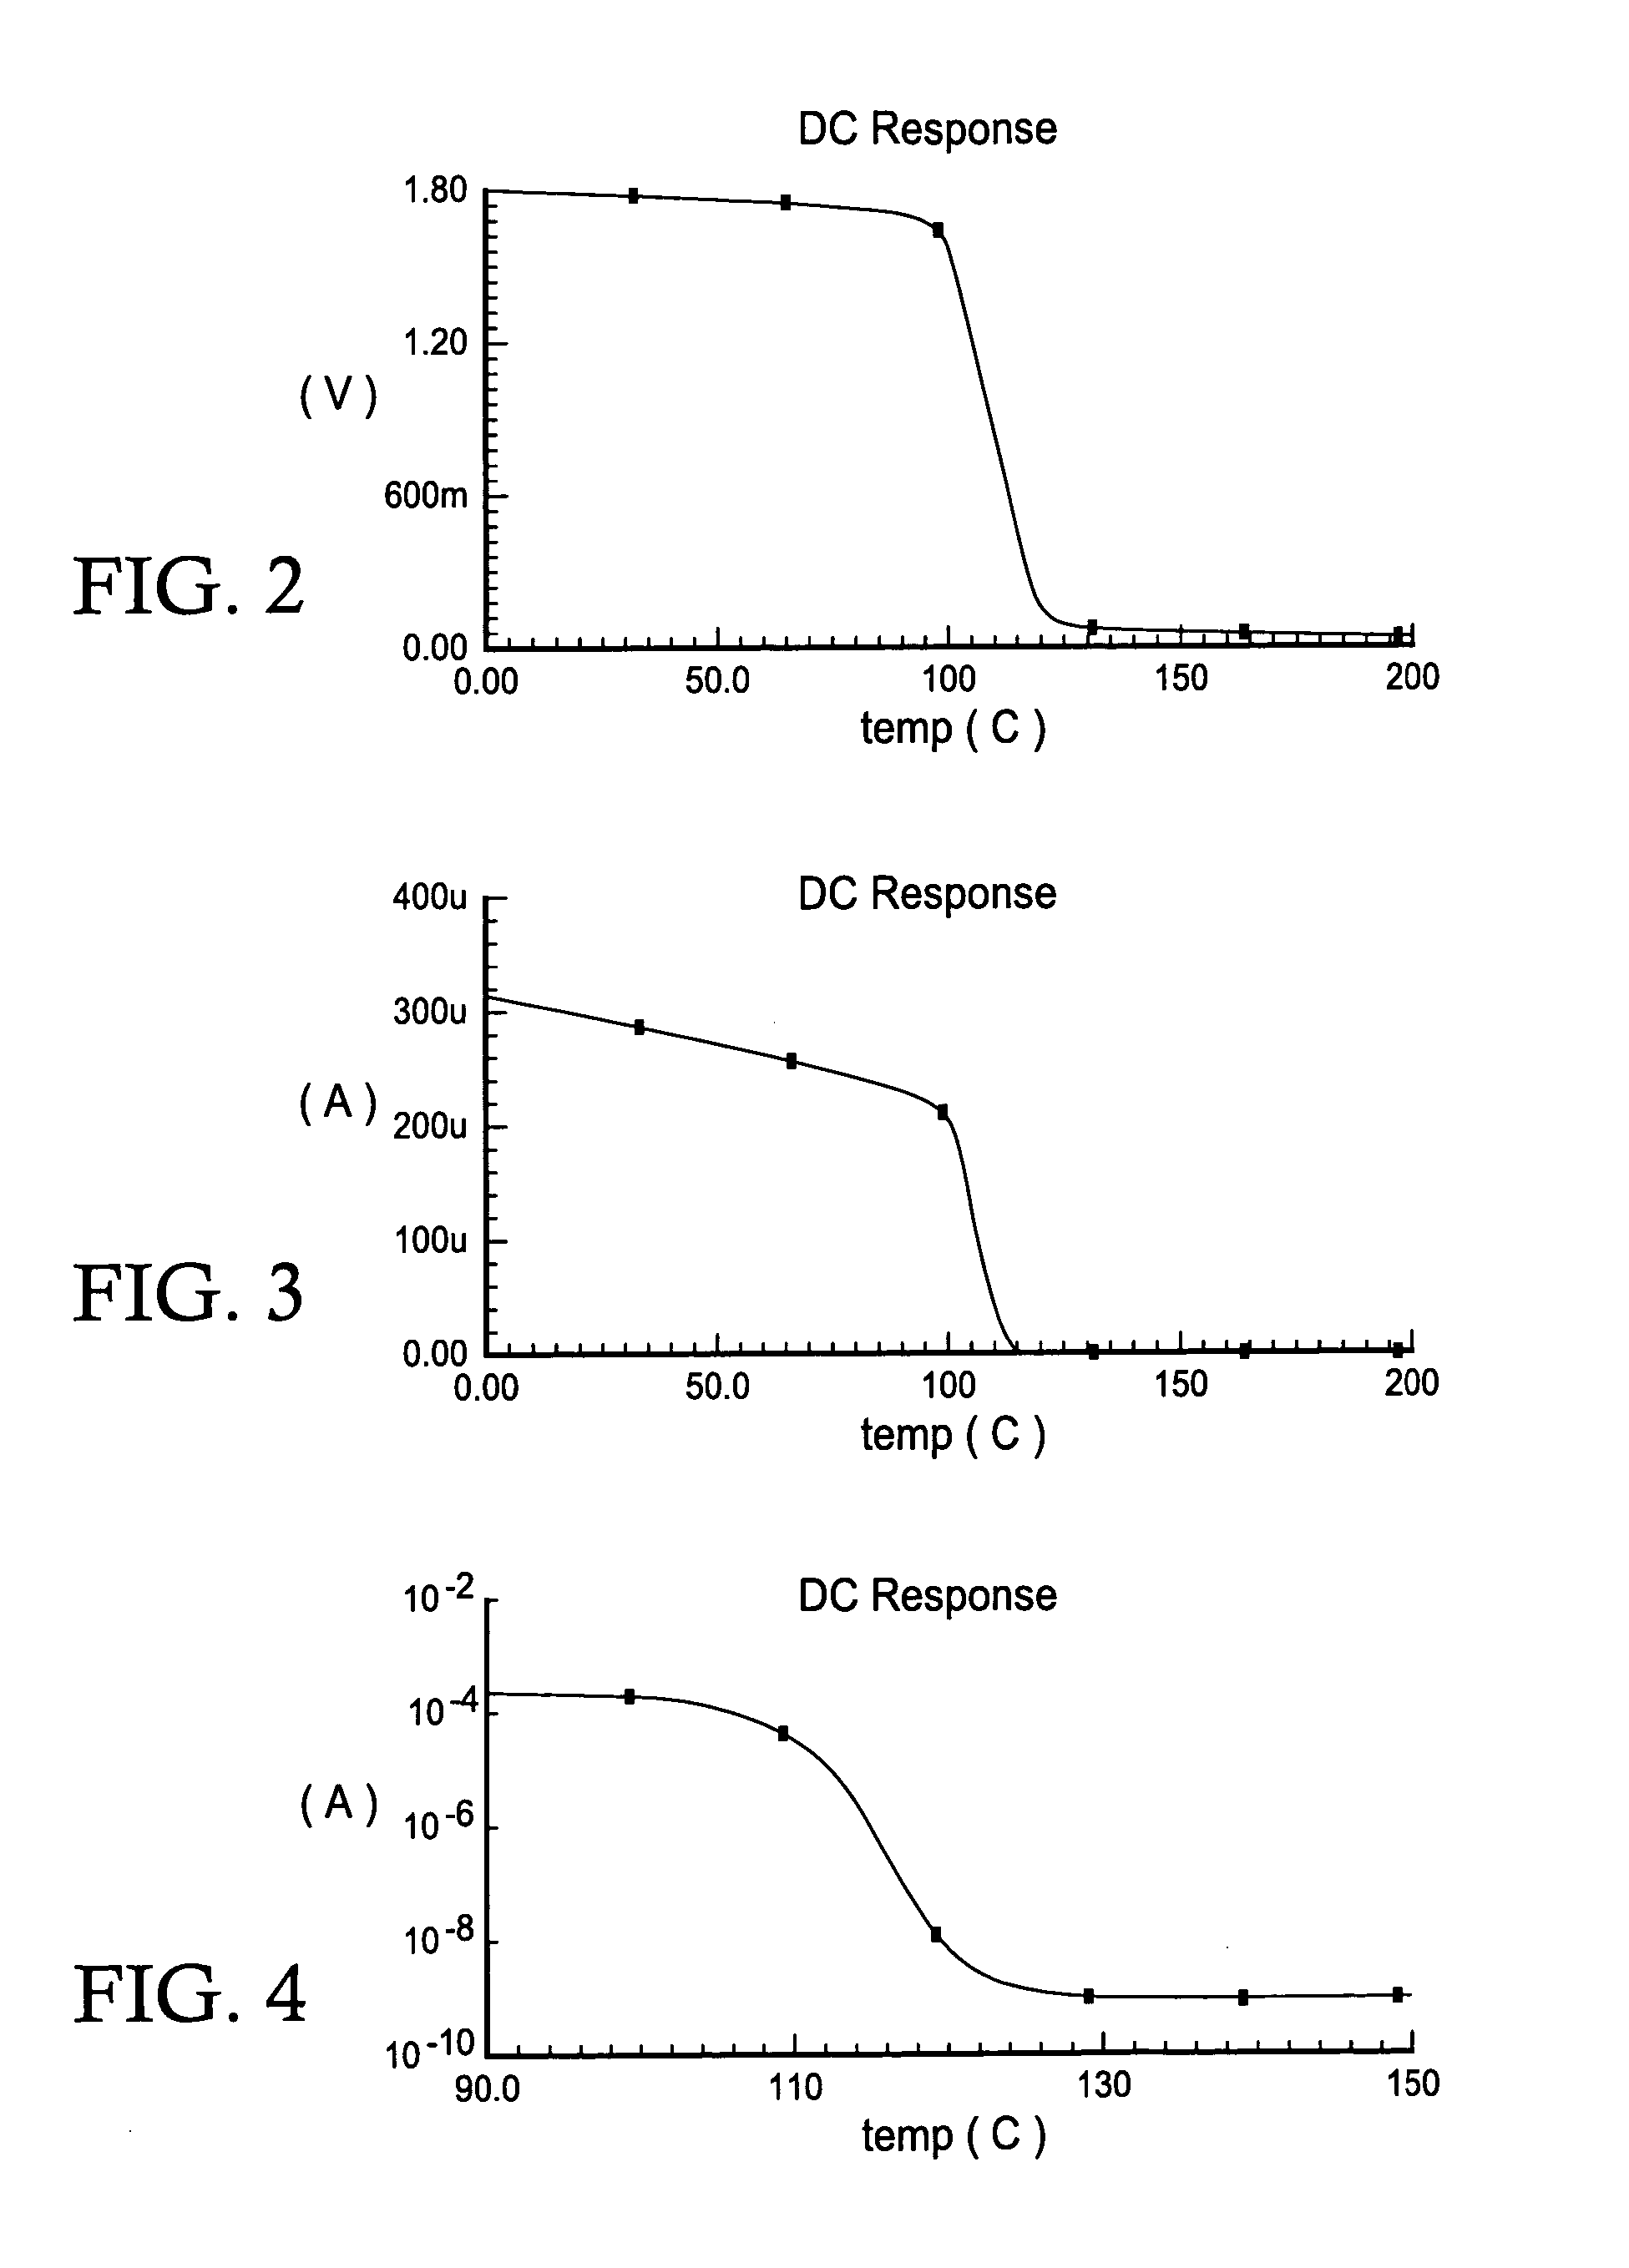 Self-timed thermally-aware circuits and methods of use thereof